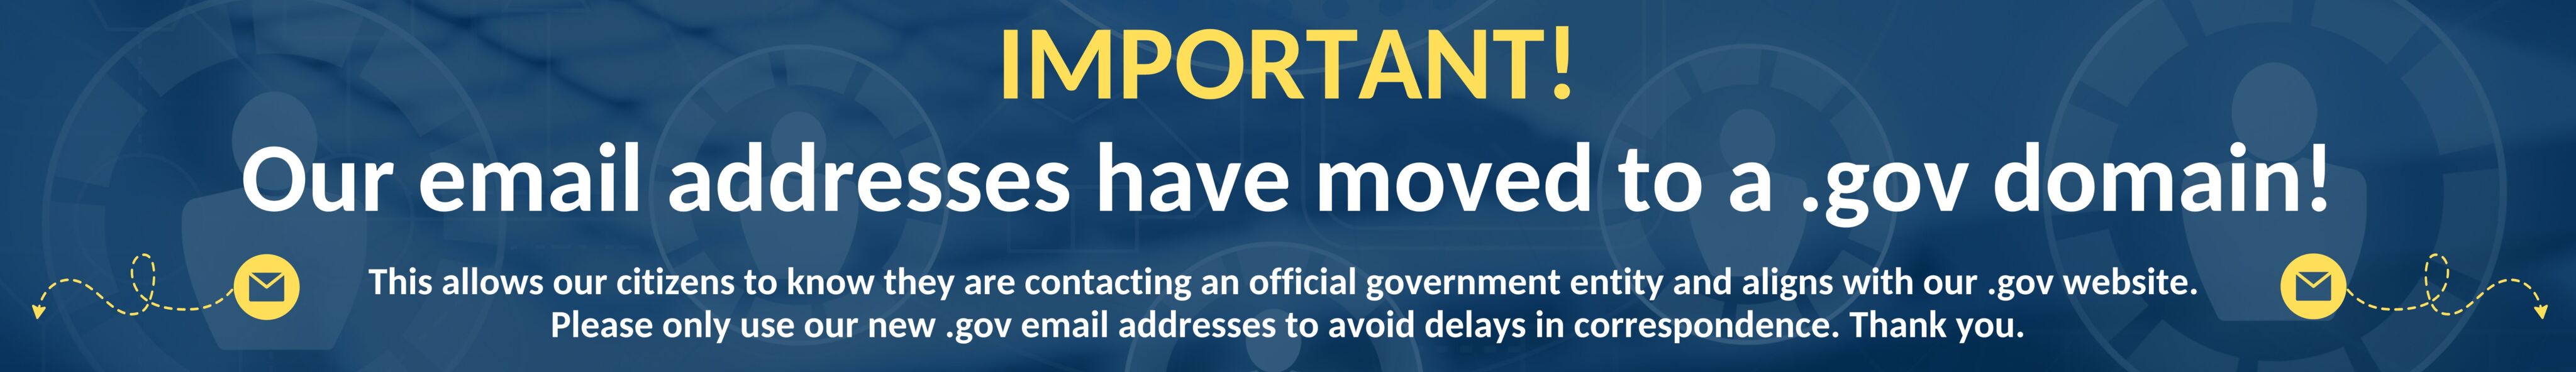 Important! Our email addresses have moved to a .gov domain! This allows our citizens to know they are contacting an official government entity and aligns with our .gov website. Please only use our new .gov email addresses to avoid delays in correspondence. Thank you.